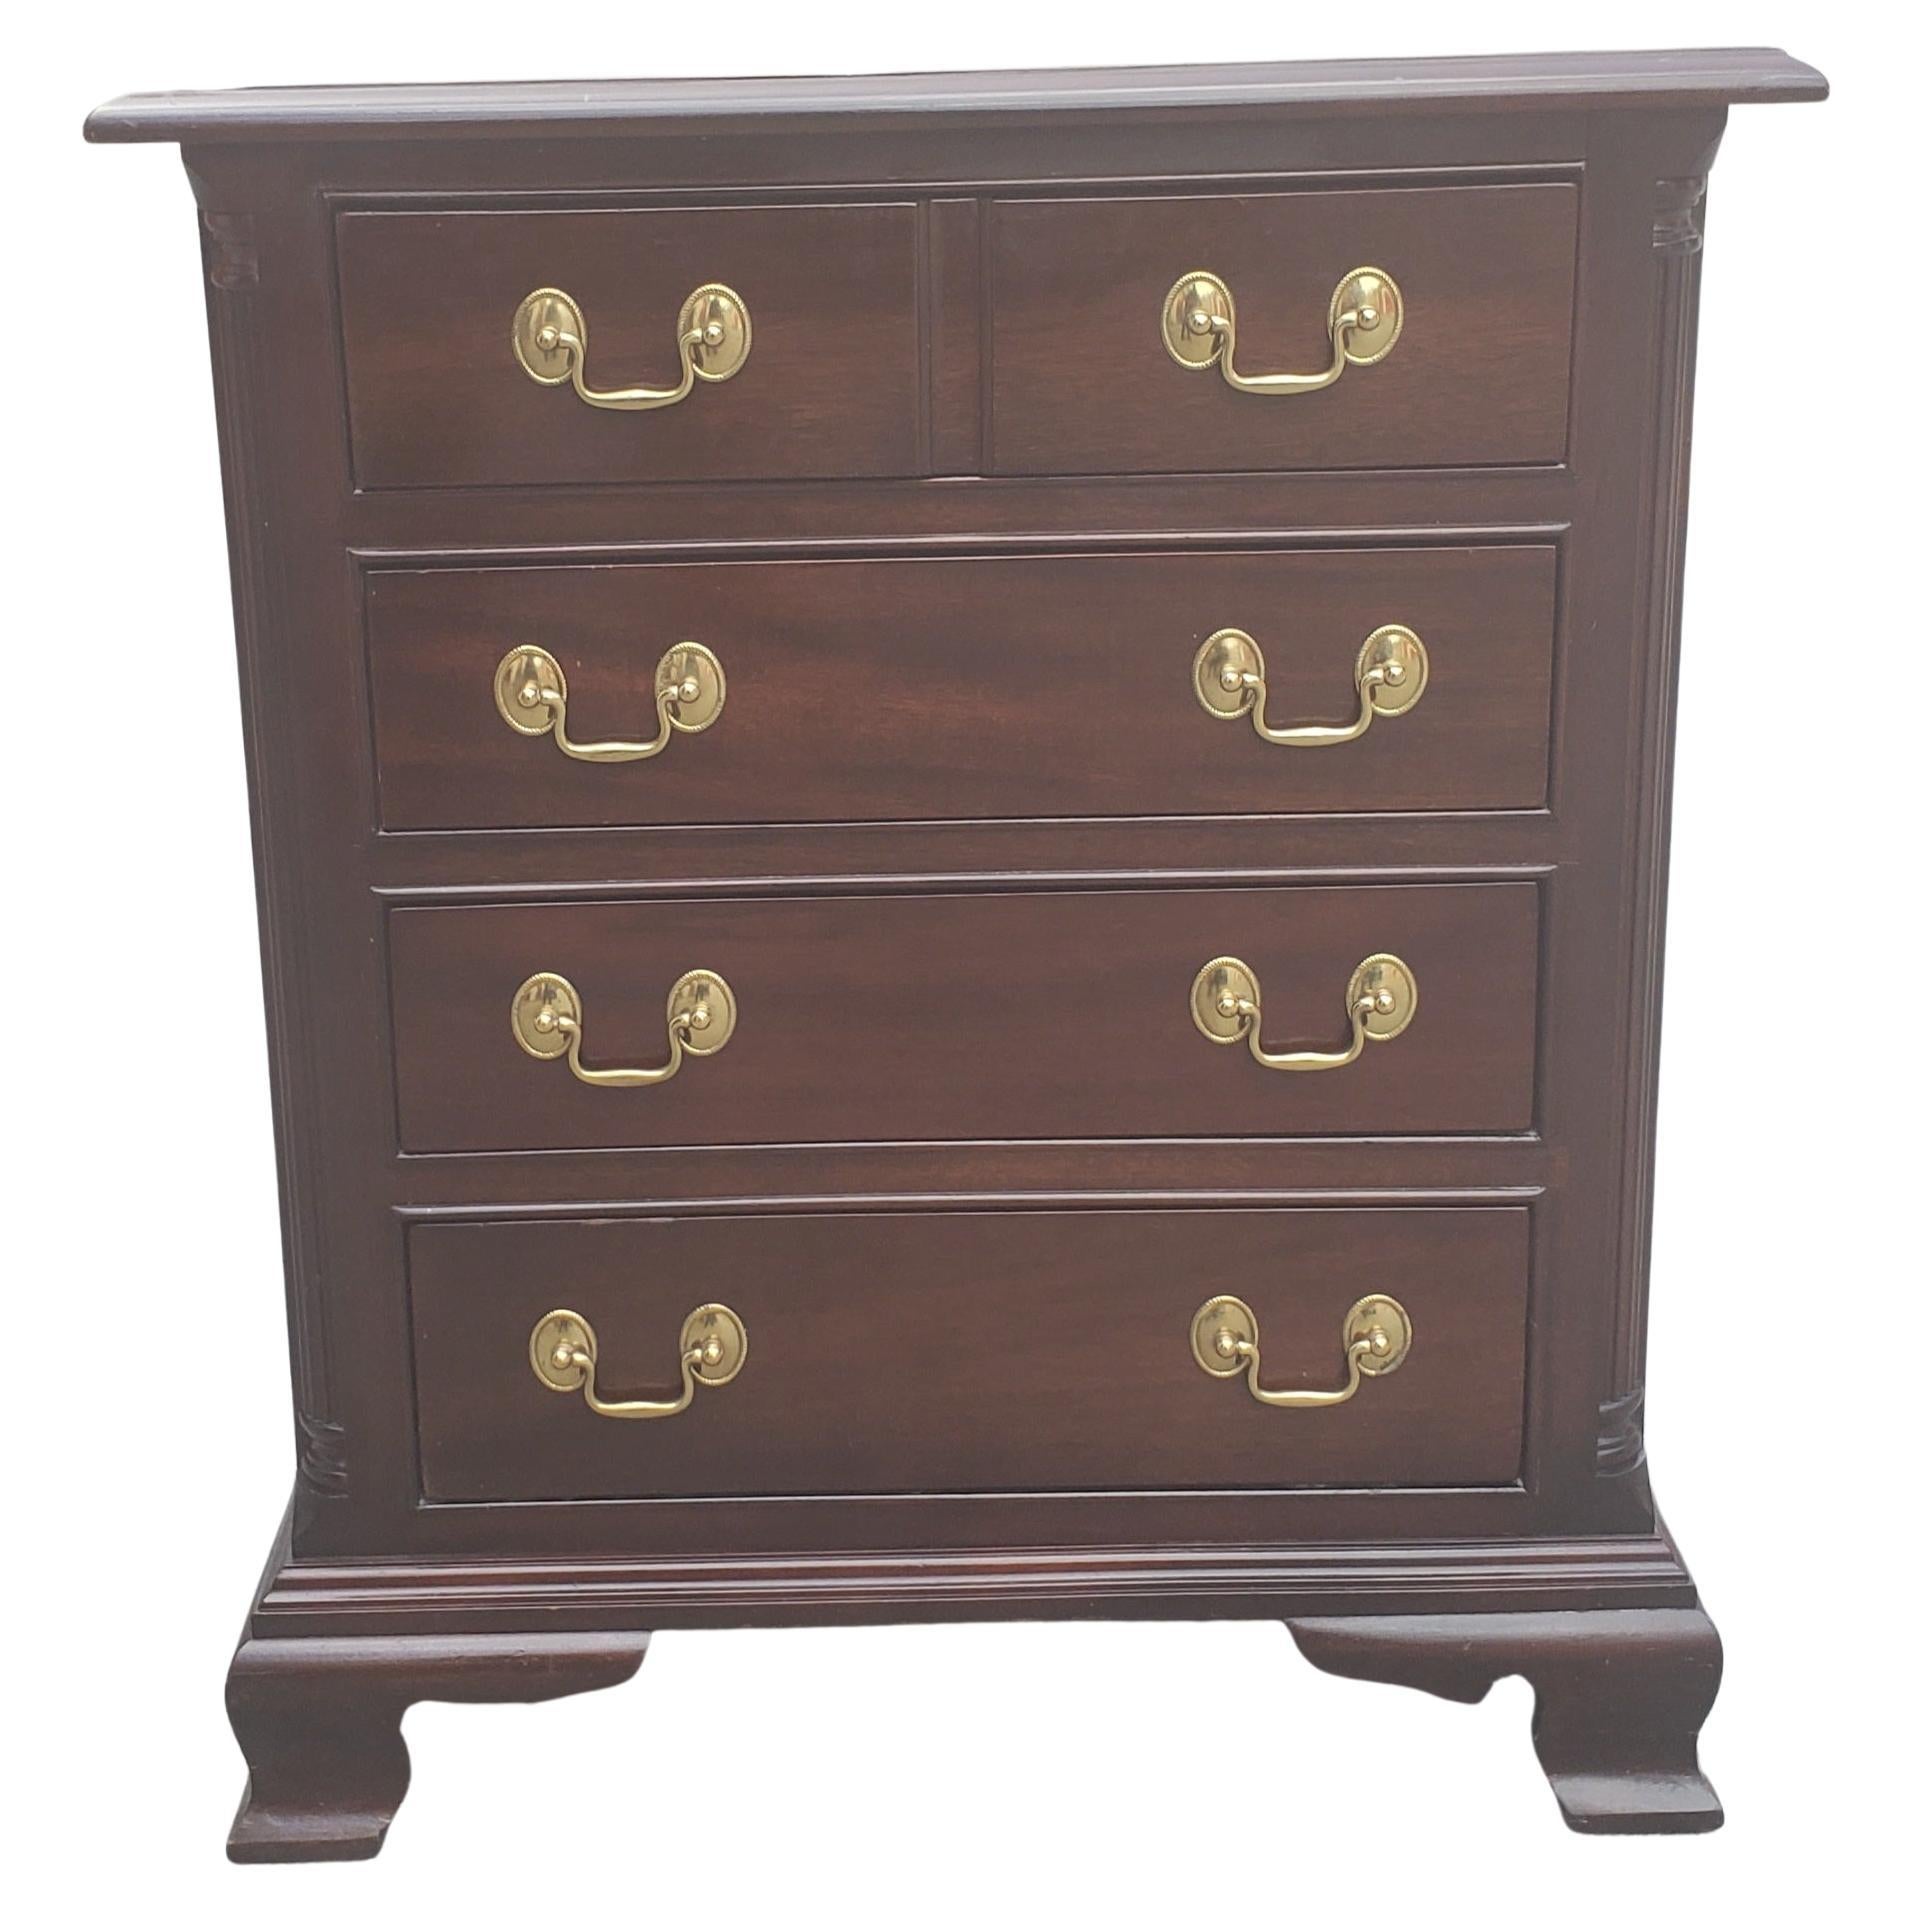 Stickley Chippendale Solid Cherry 4 Drawer Bedside Chest, circa 1980s